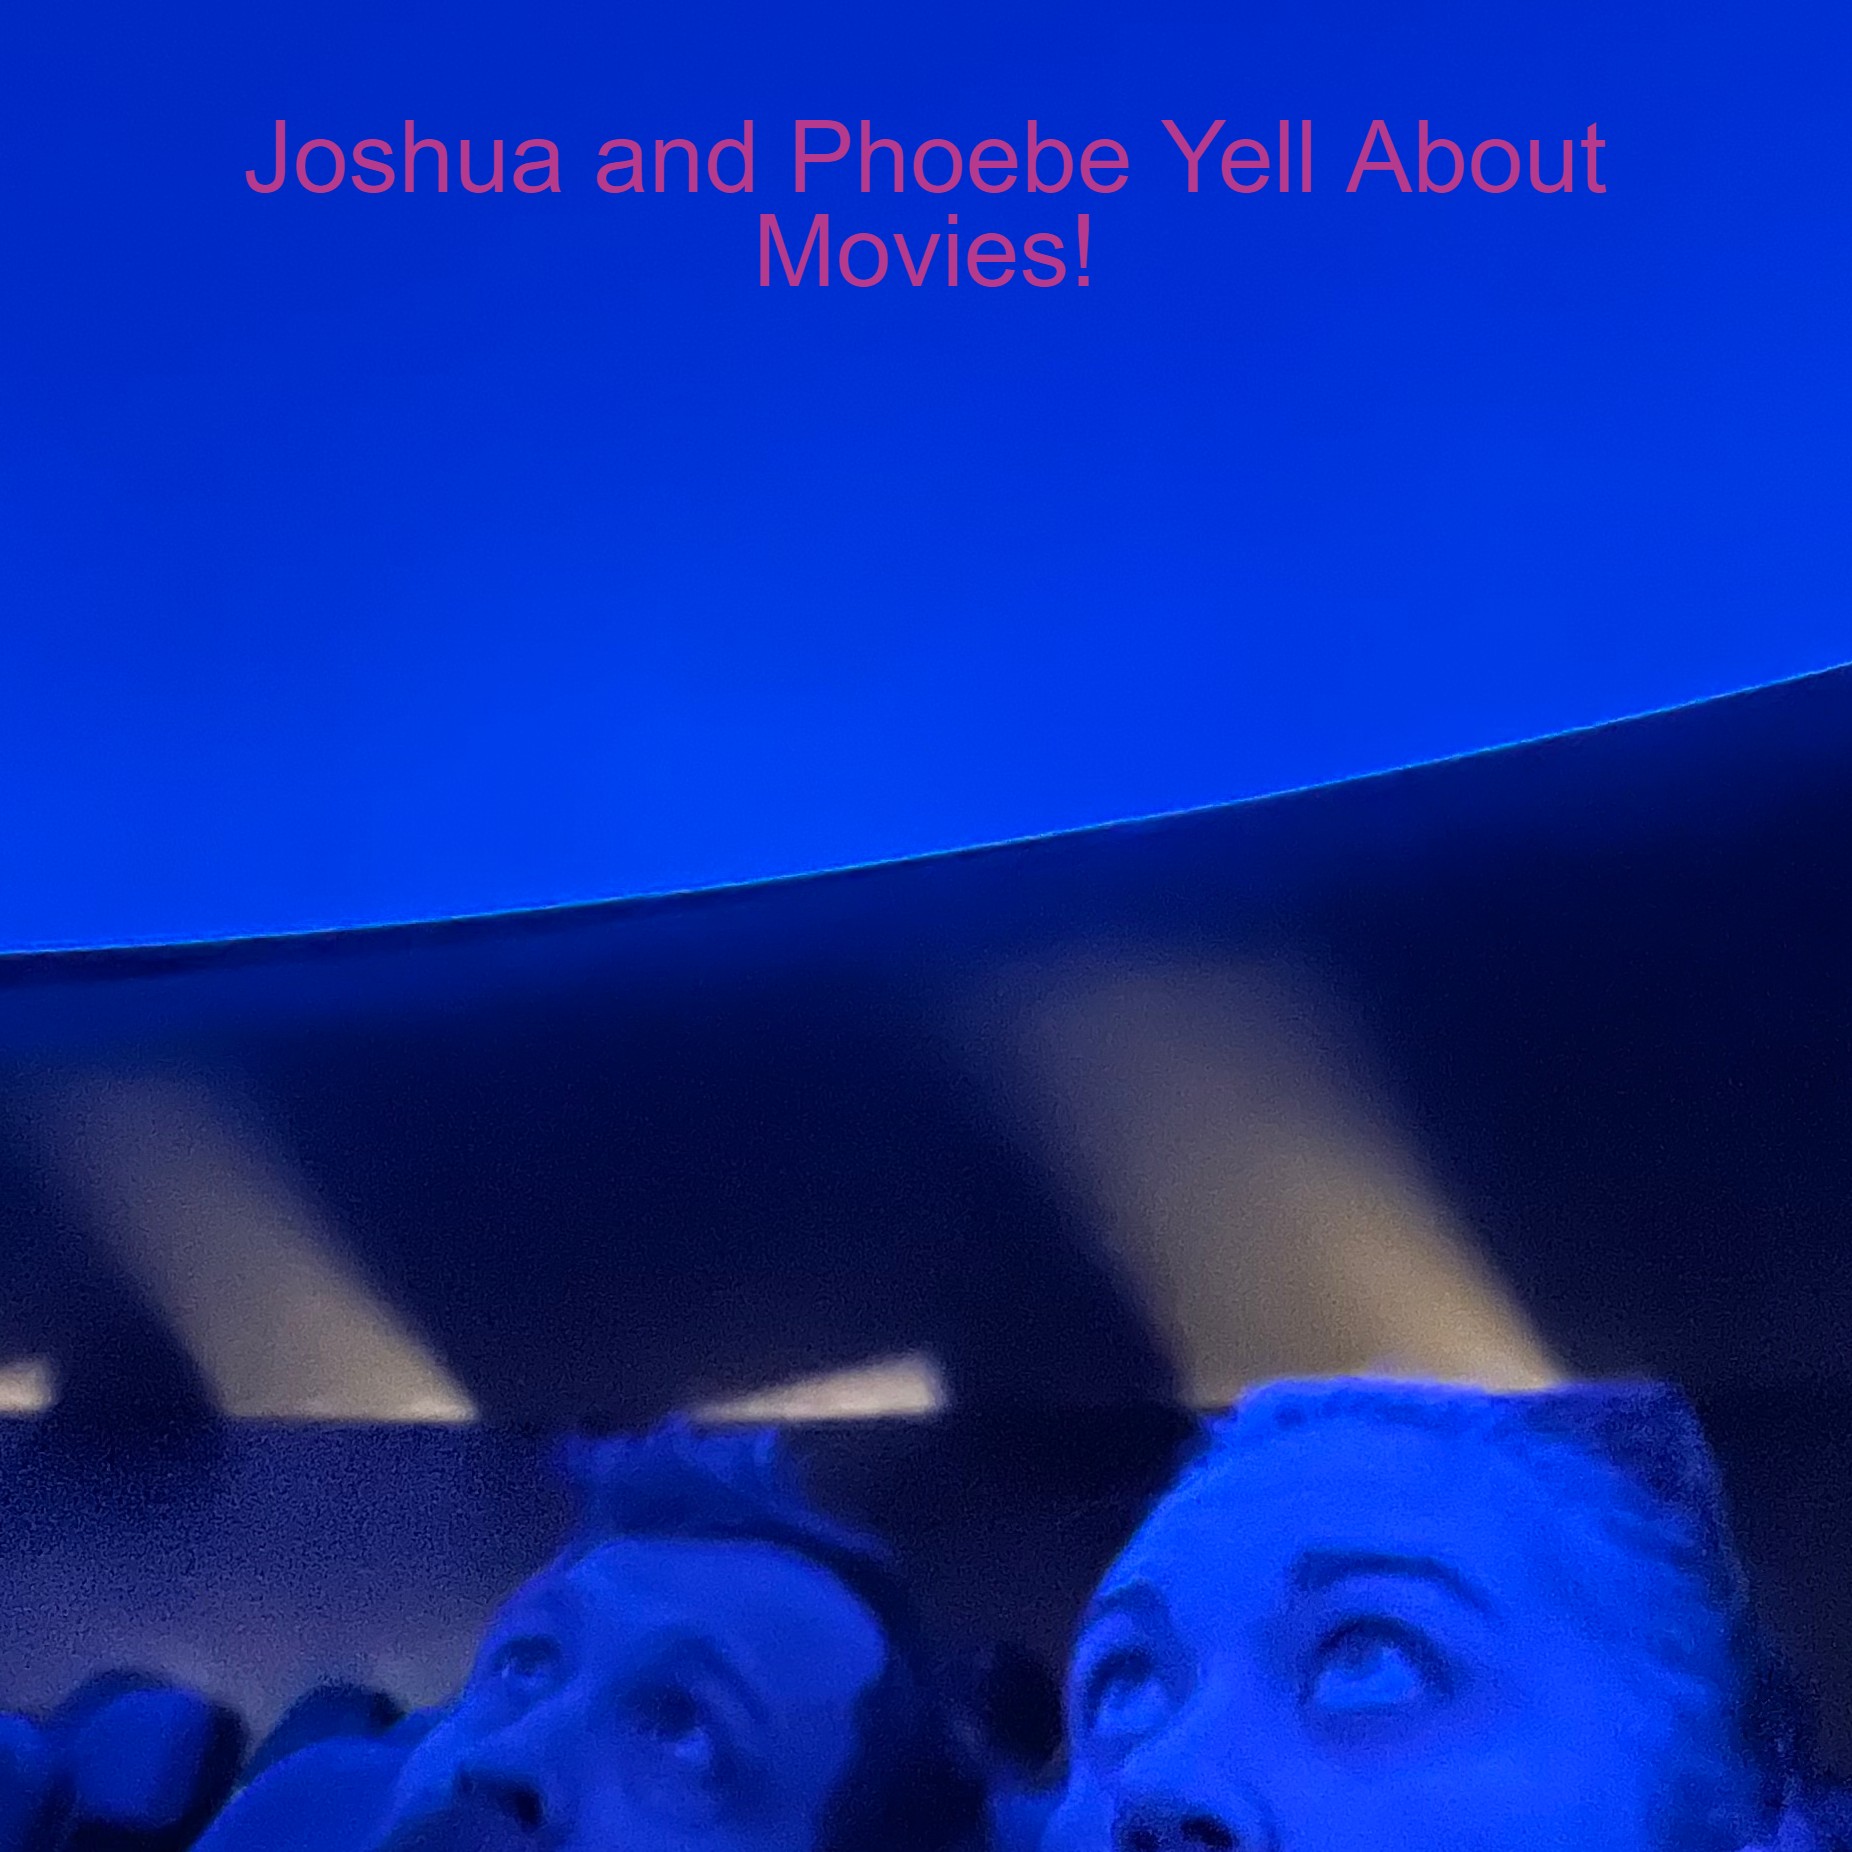 Joshua and Phoebe Yell About Movies!